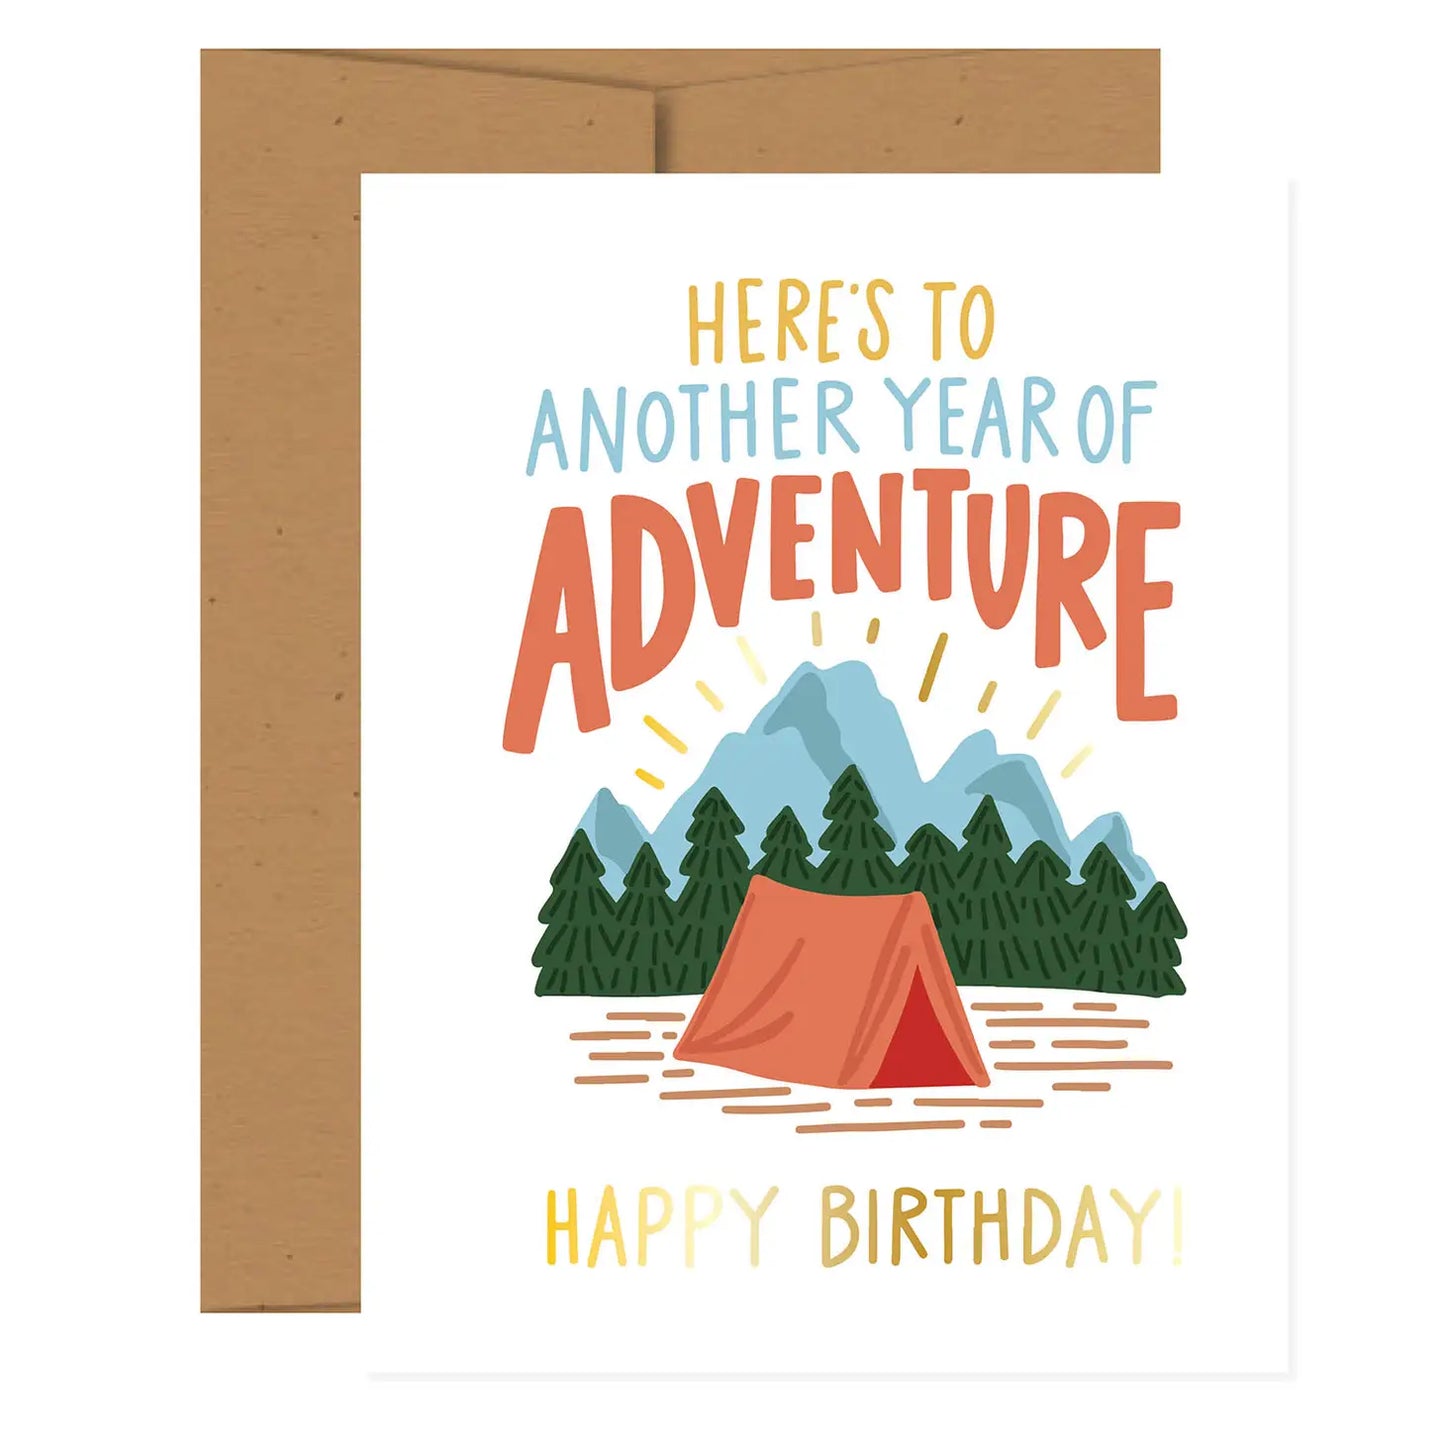 Deluxe Greeting Cards